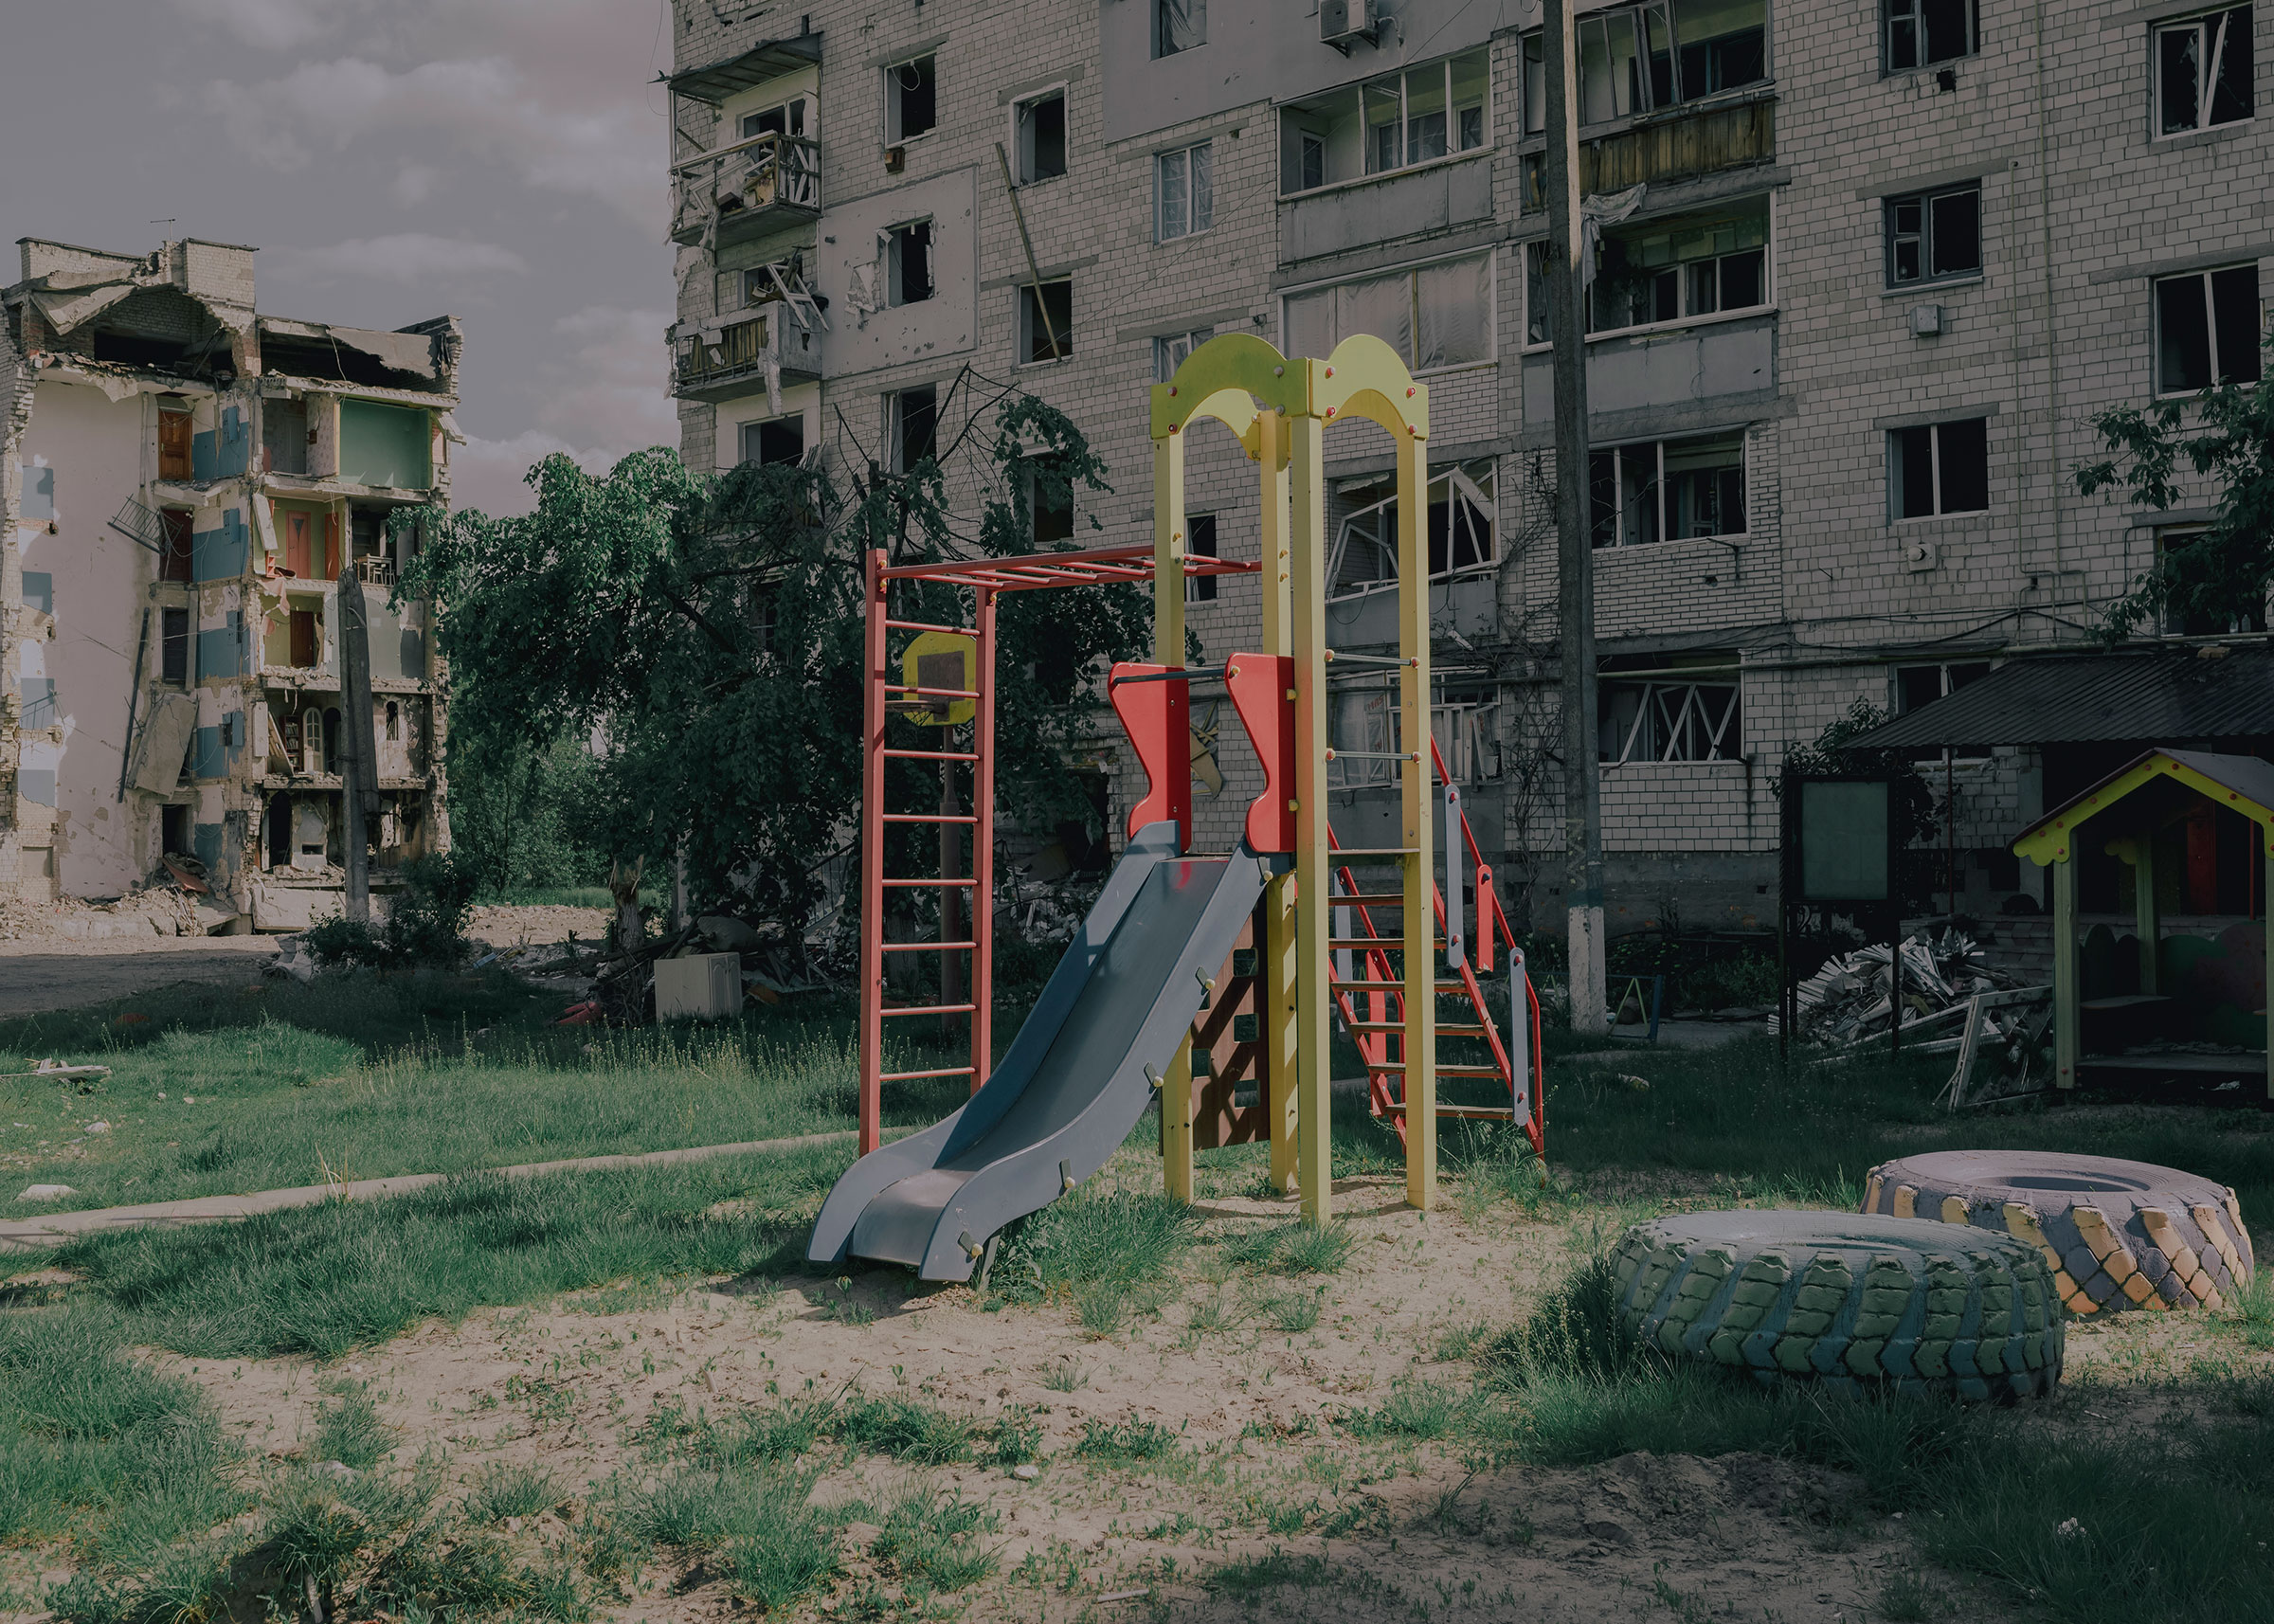 A play structure behind several destroyed buildings is still used by children. (Fabian Ritter—DOCKS Collective)